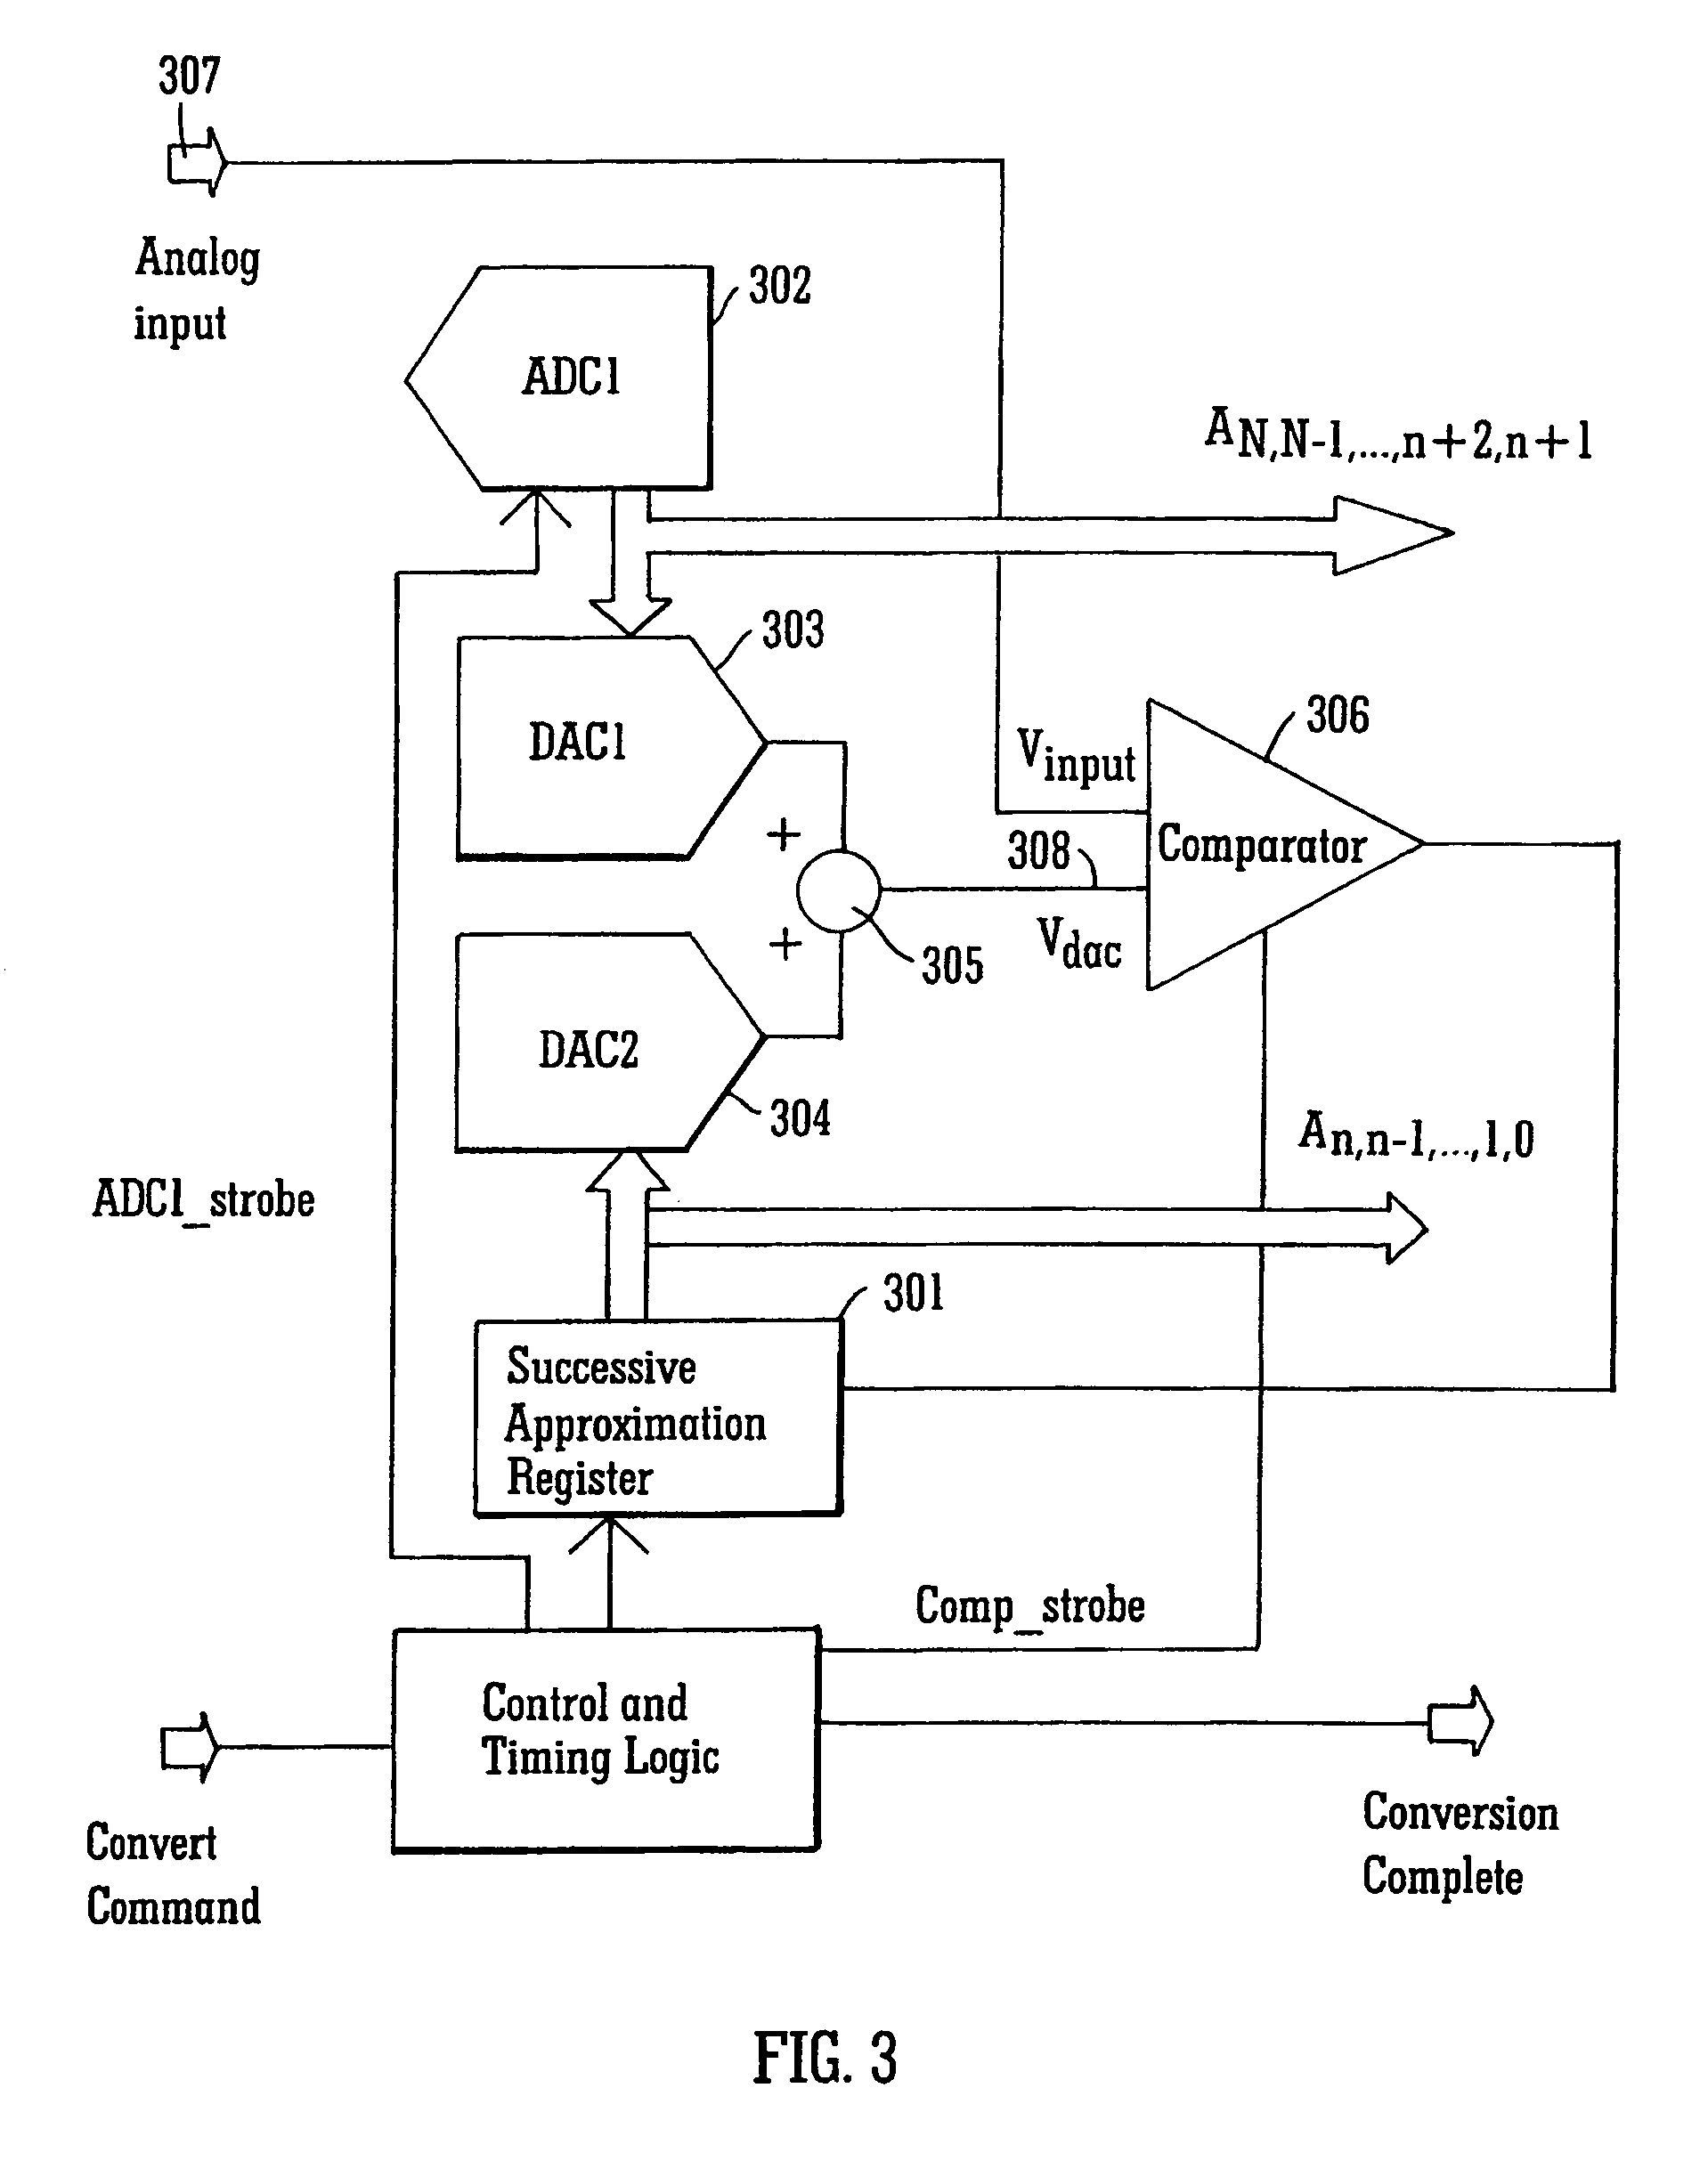 Successive approximation analog-to-digital converter with pre-loaded SAR registers